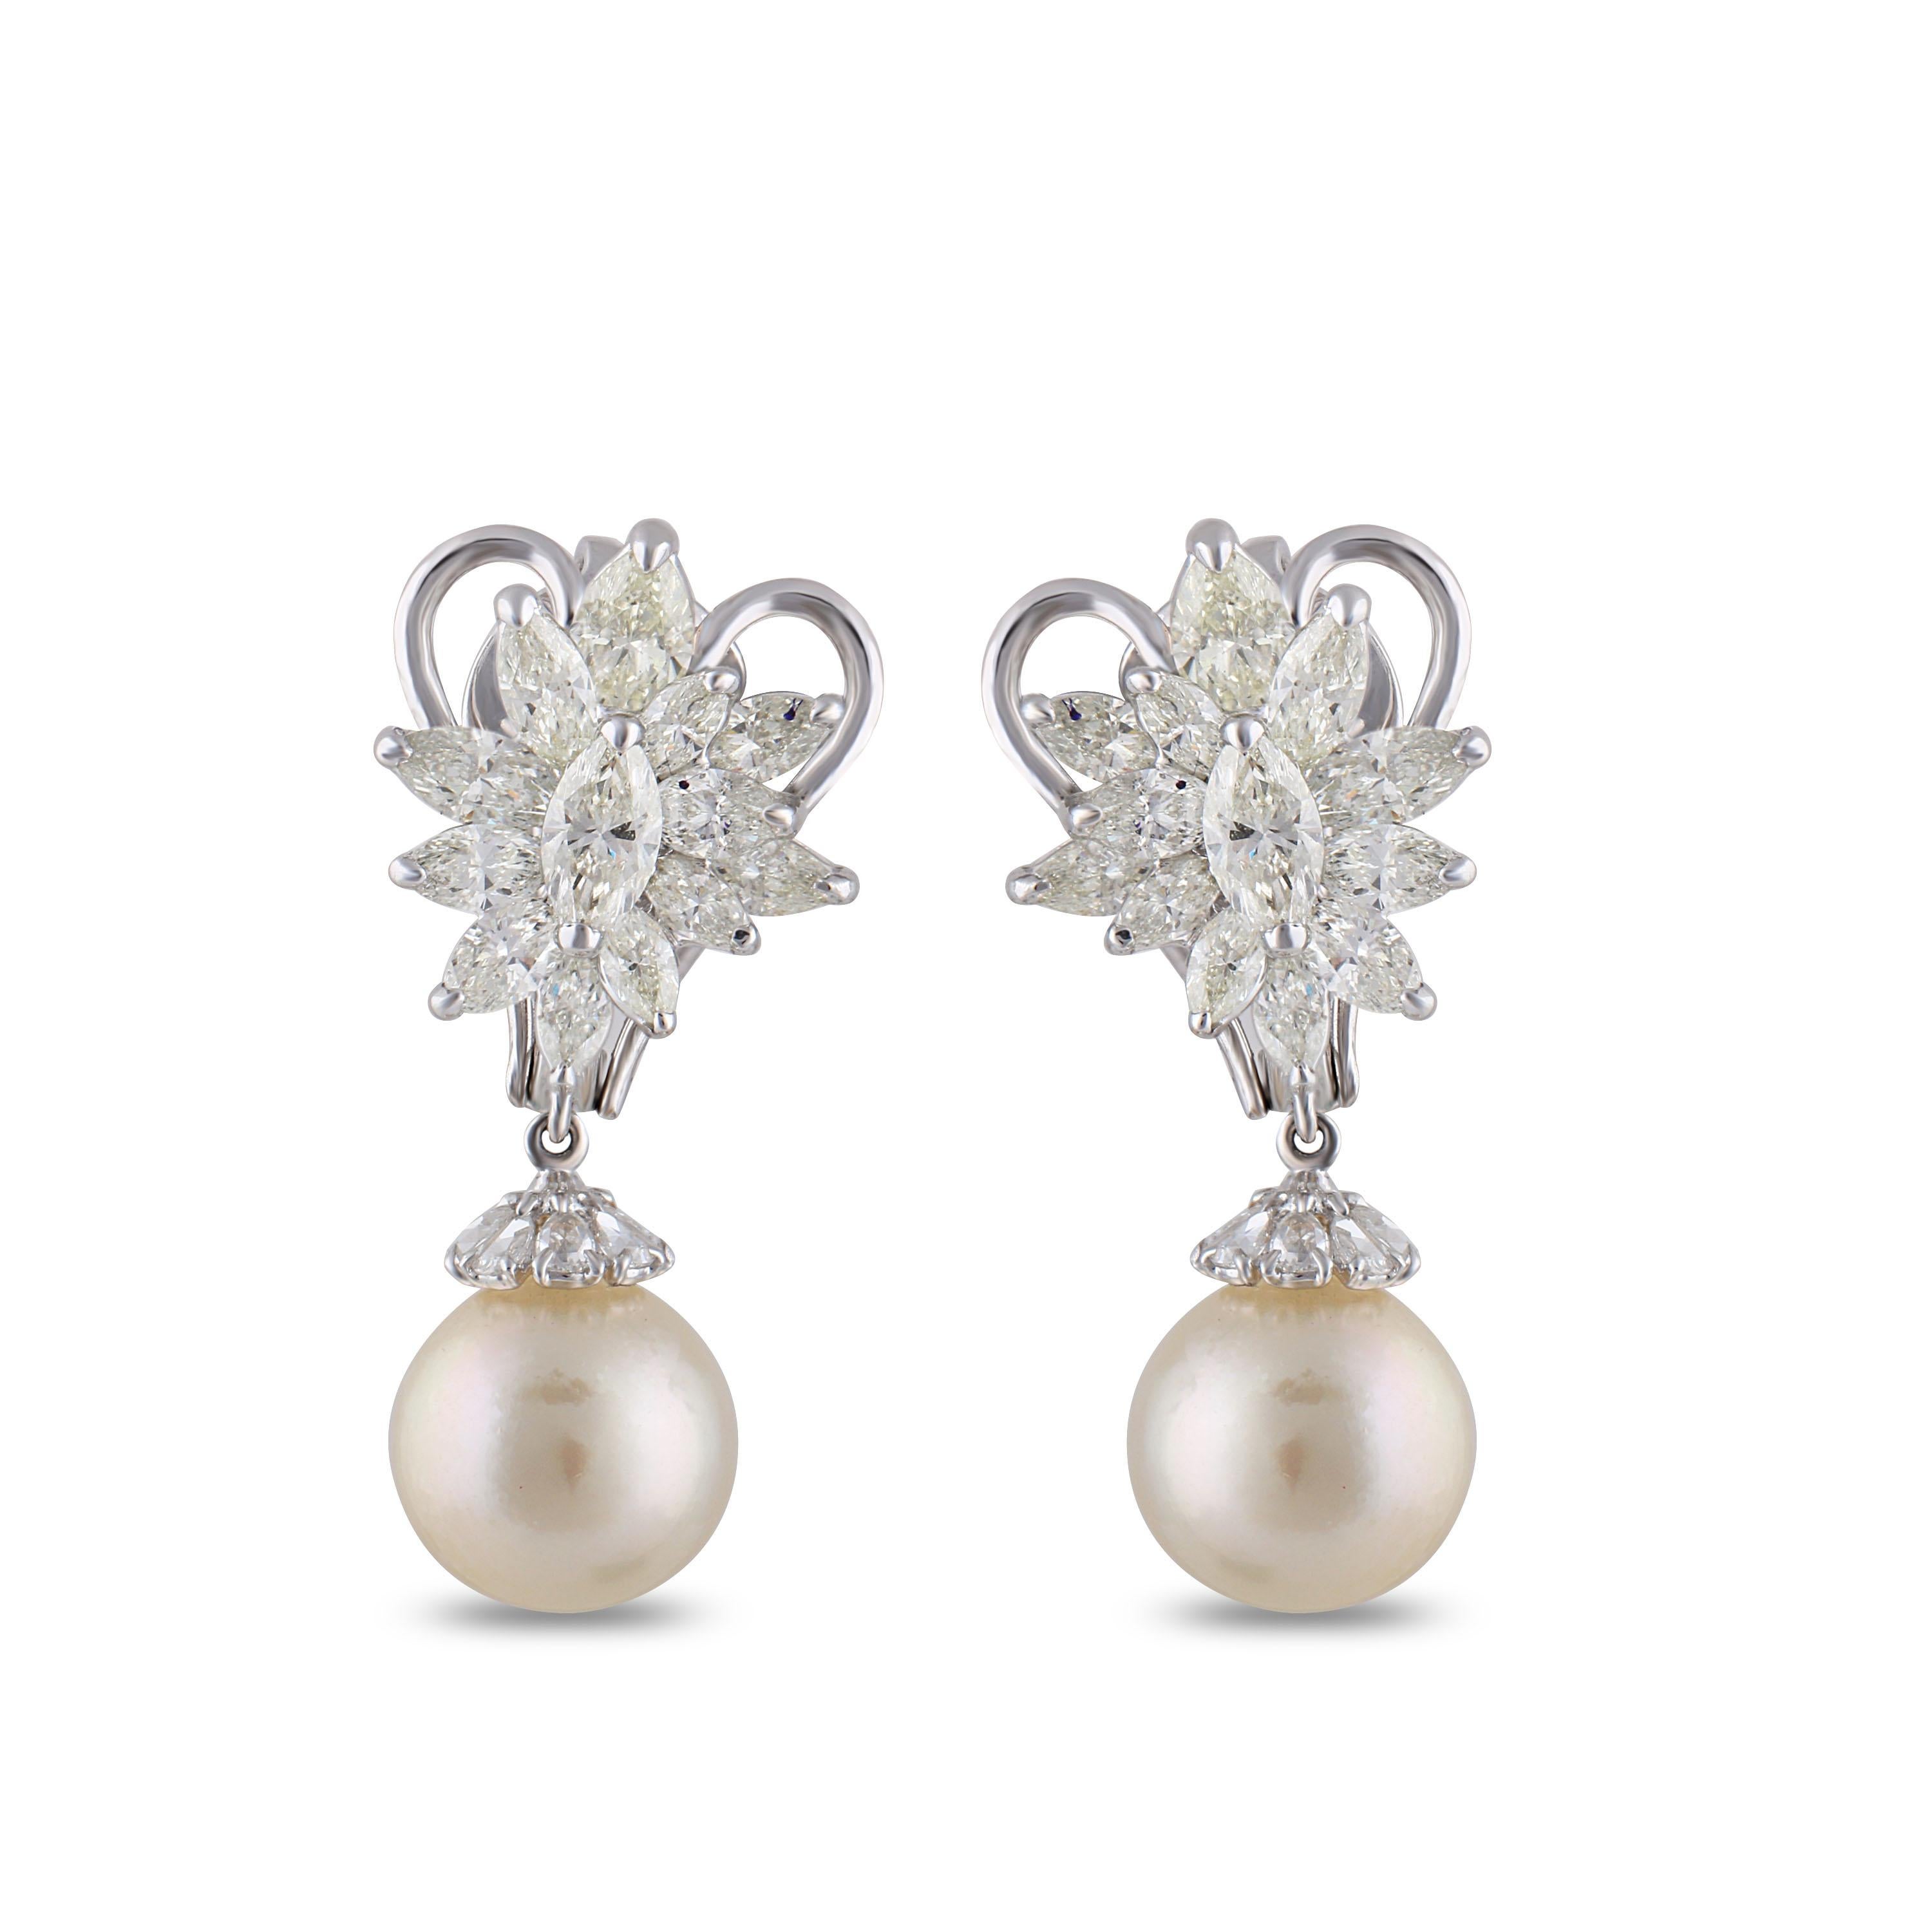 Delicate flowers with calming pearl drops make up this beautiful pair of 18K white gold earrings that are carefully studded with brilliant cut marquise, pear rose cut diamonds and south sea pearls in a prong setting. Its simplicity is its crowning